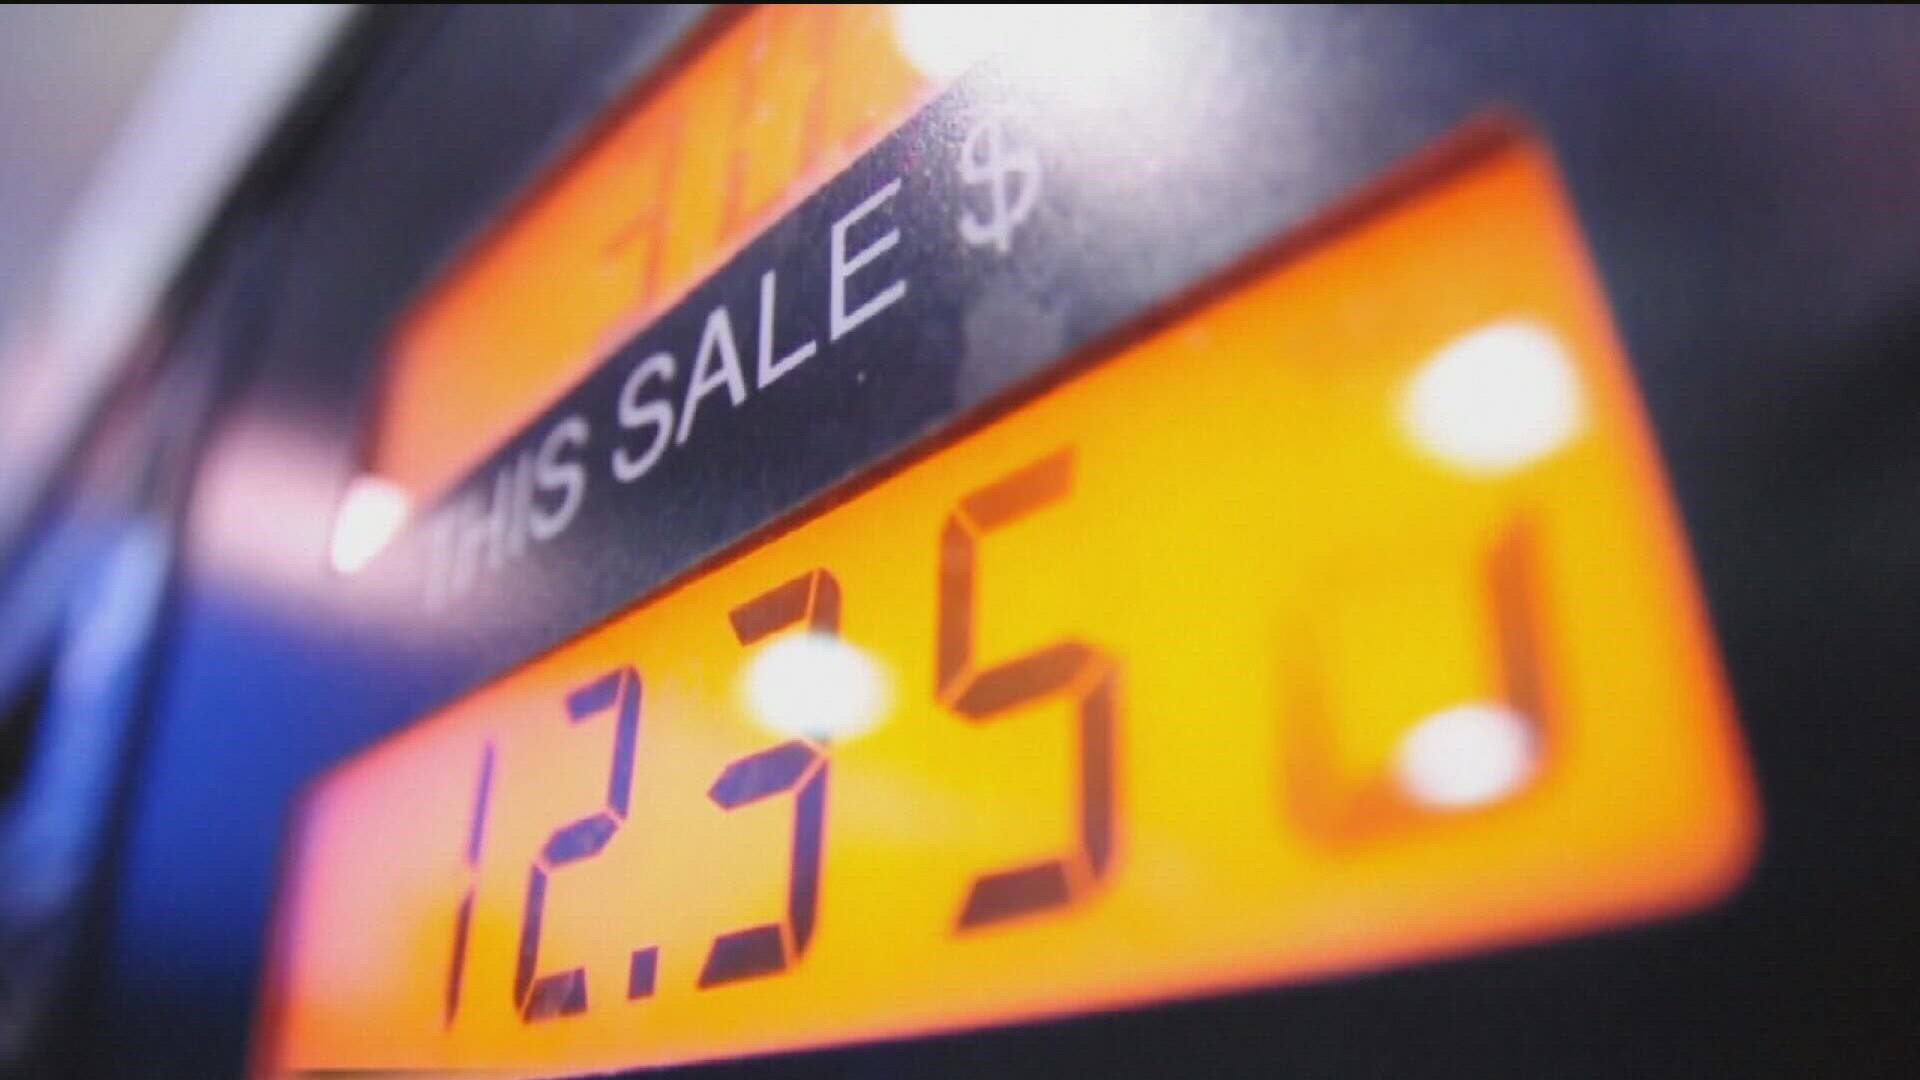 San Diego's average price per gallon was $6.31 Wednesday. That's six cents down from the record-high last week.